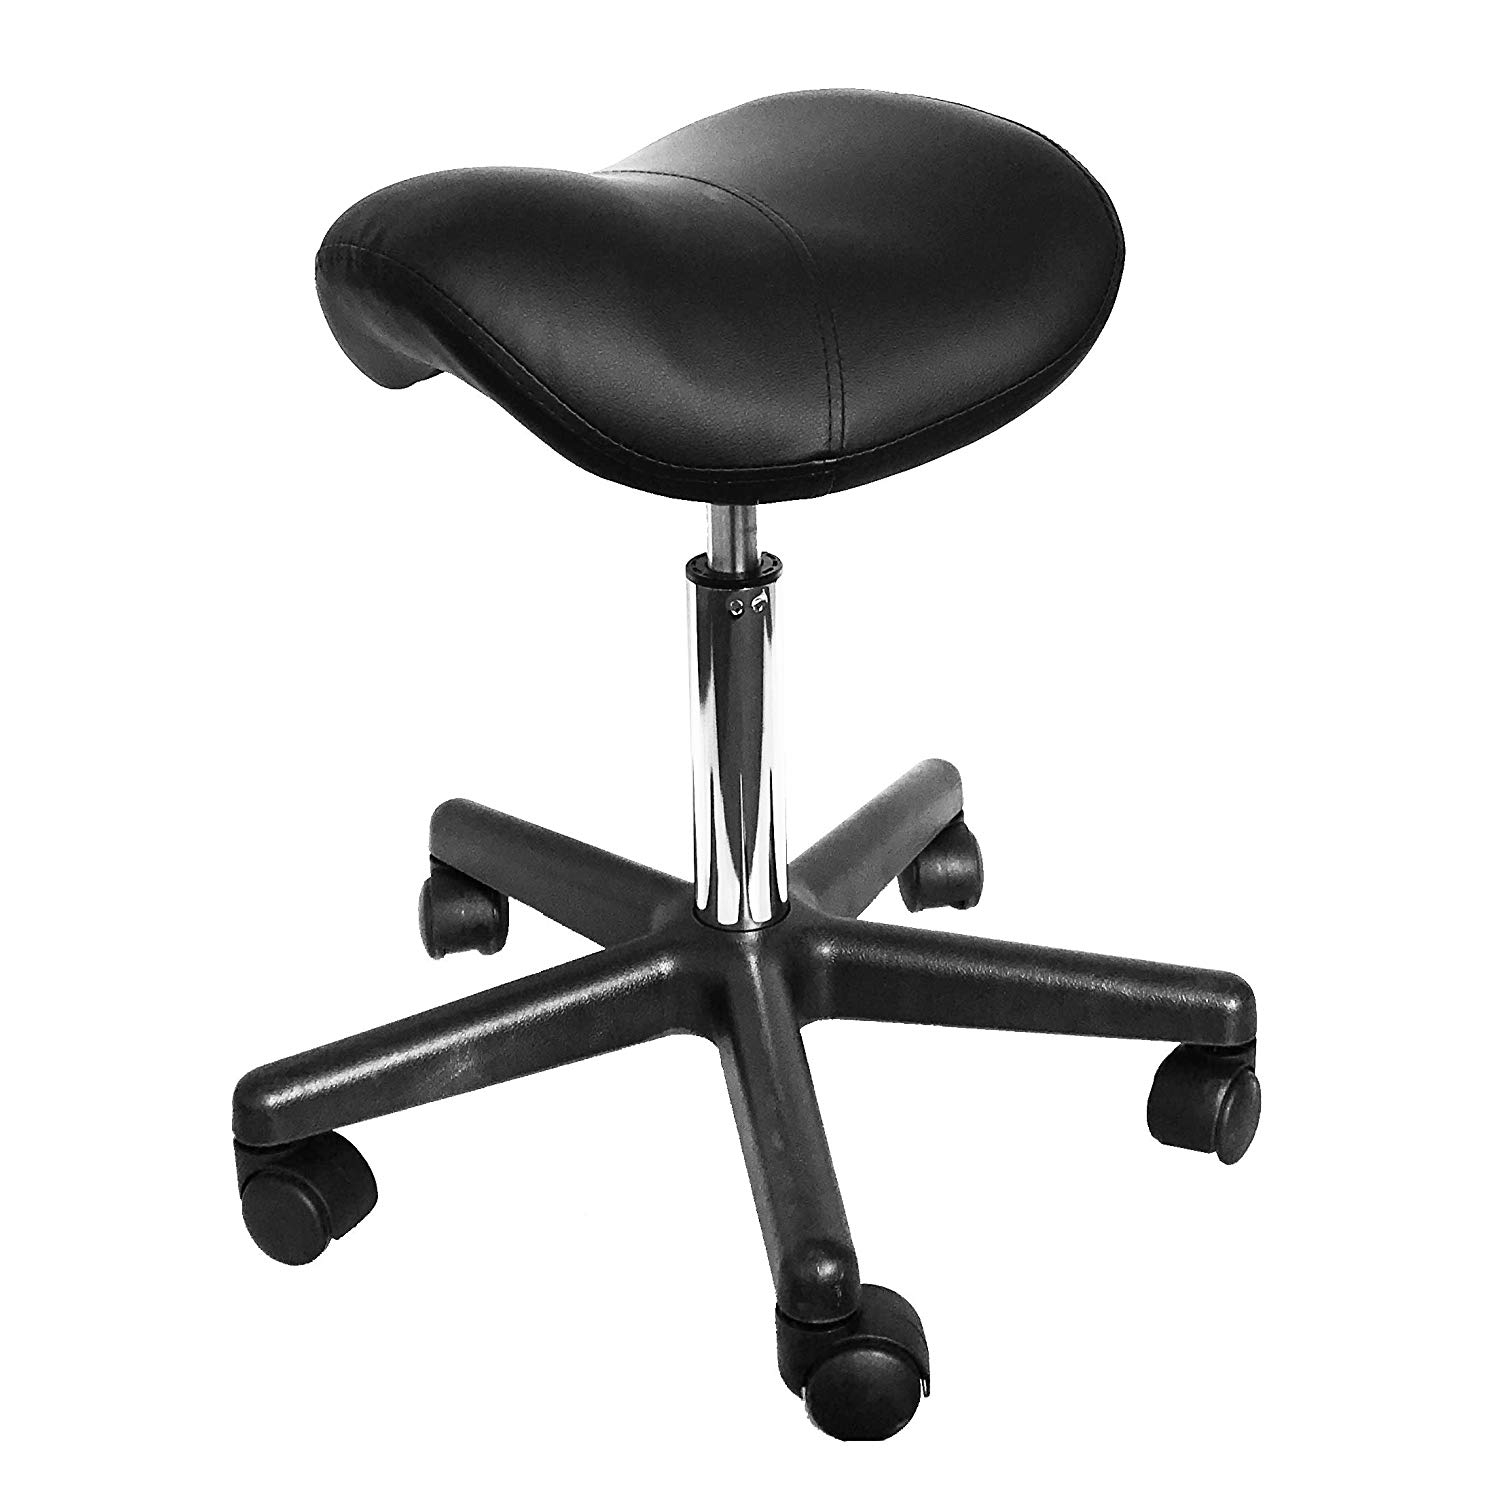 Saddle Stool Chair for Dental Office Massage Clinic Spa Salon Cutting Saddle Rolling Stool with Wheels Adjustable Height Black